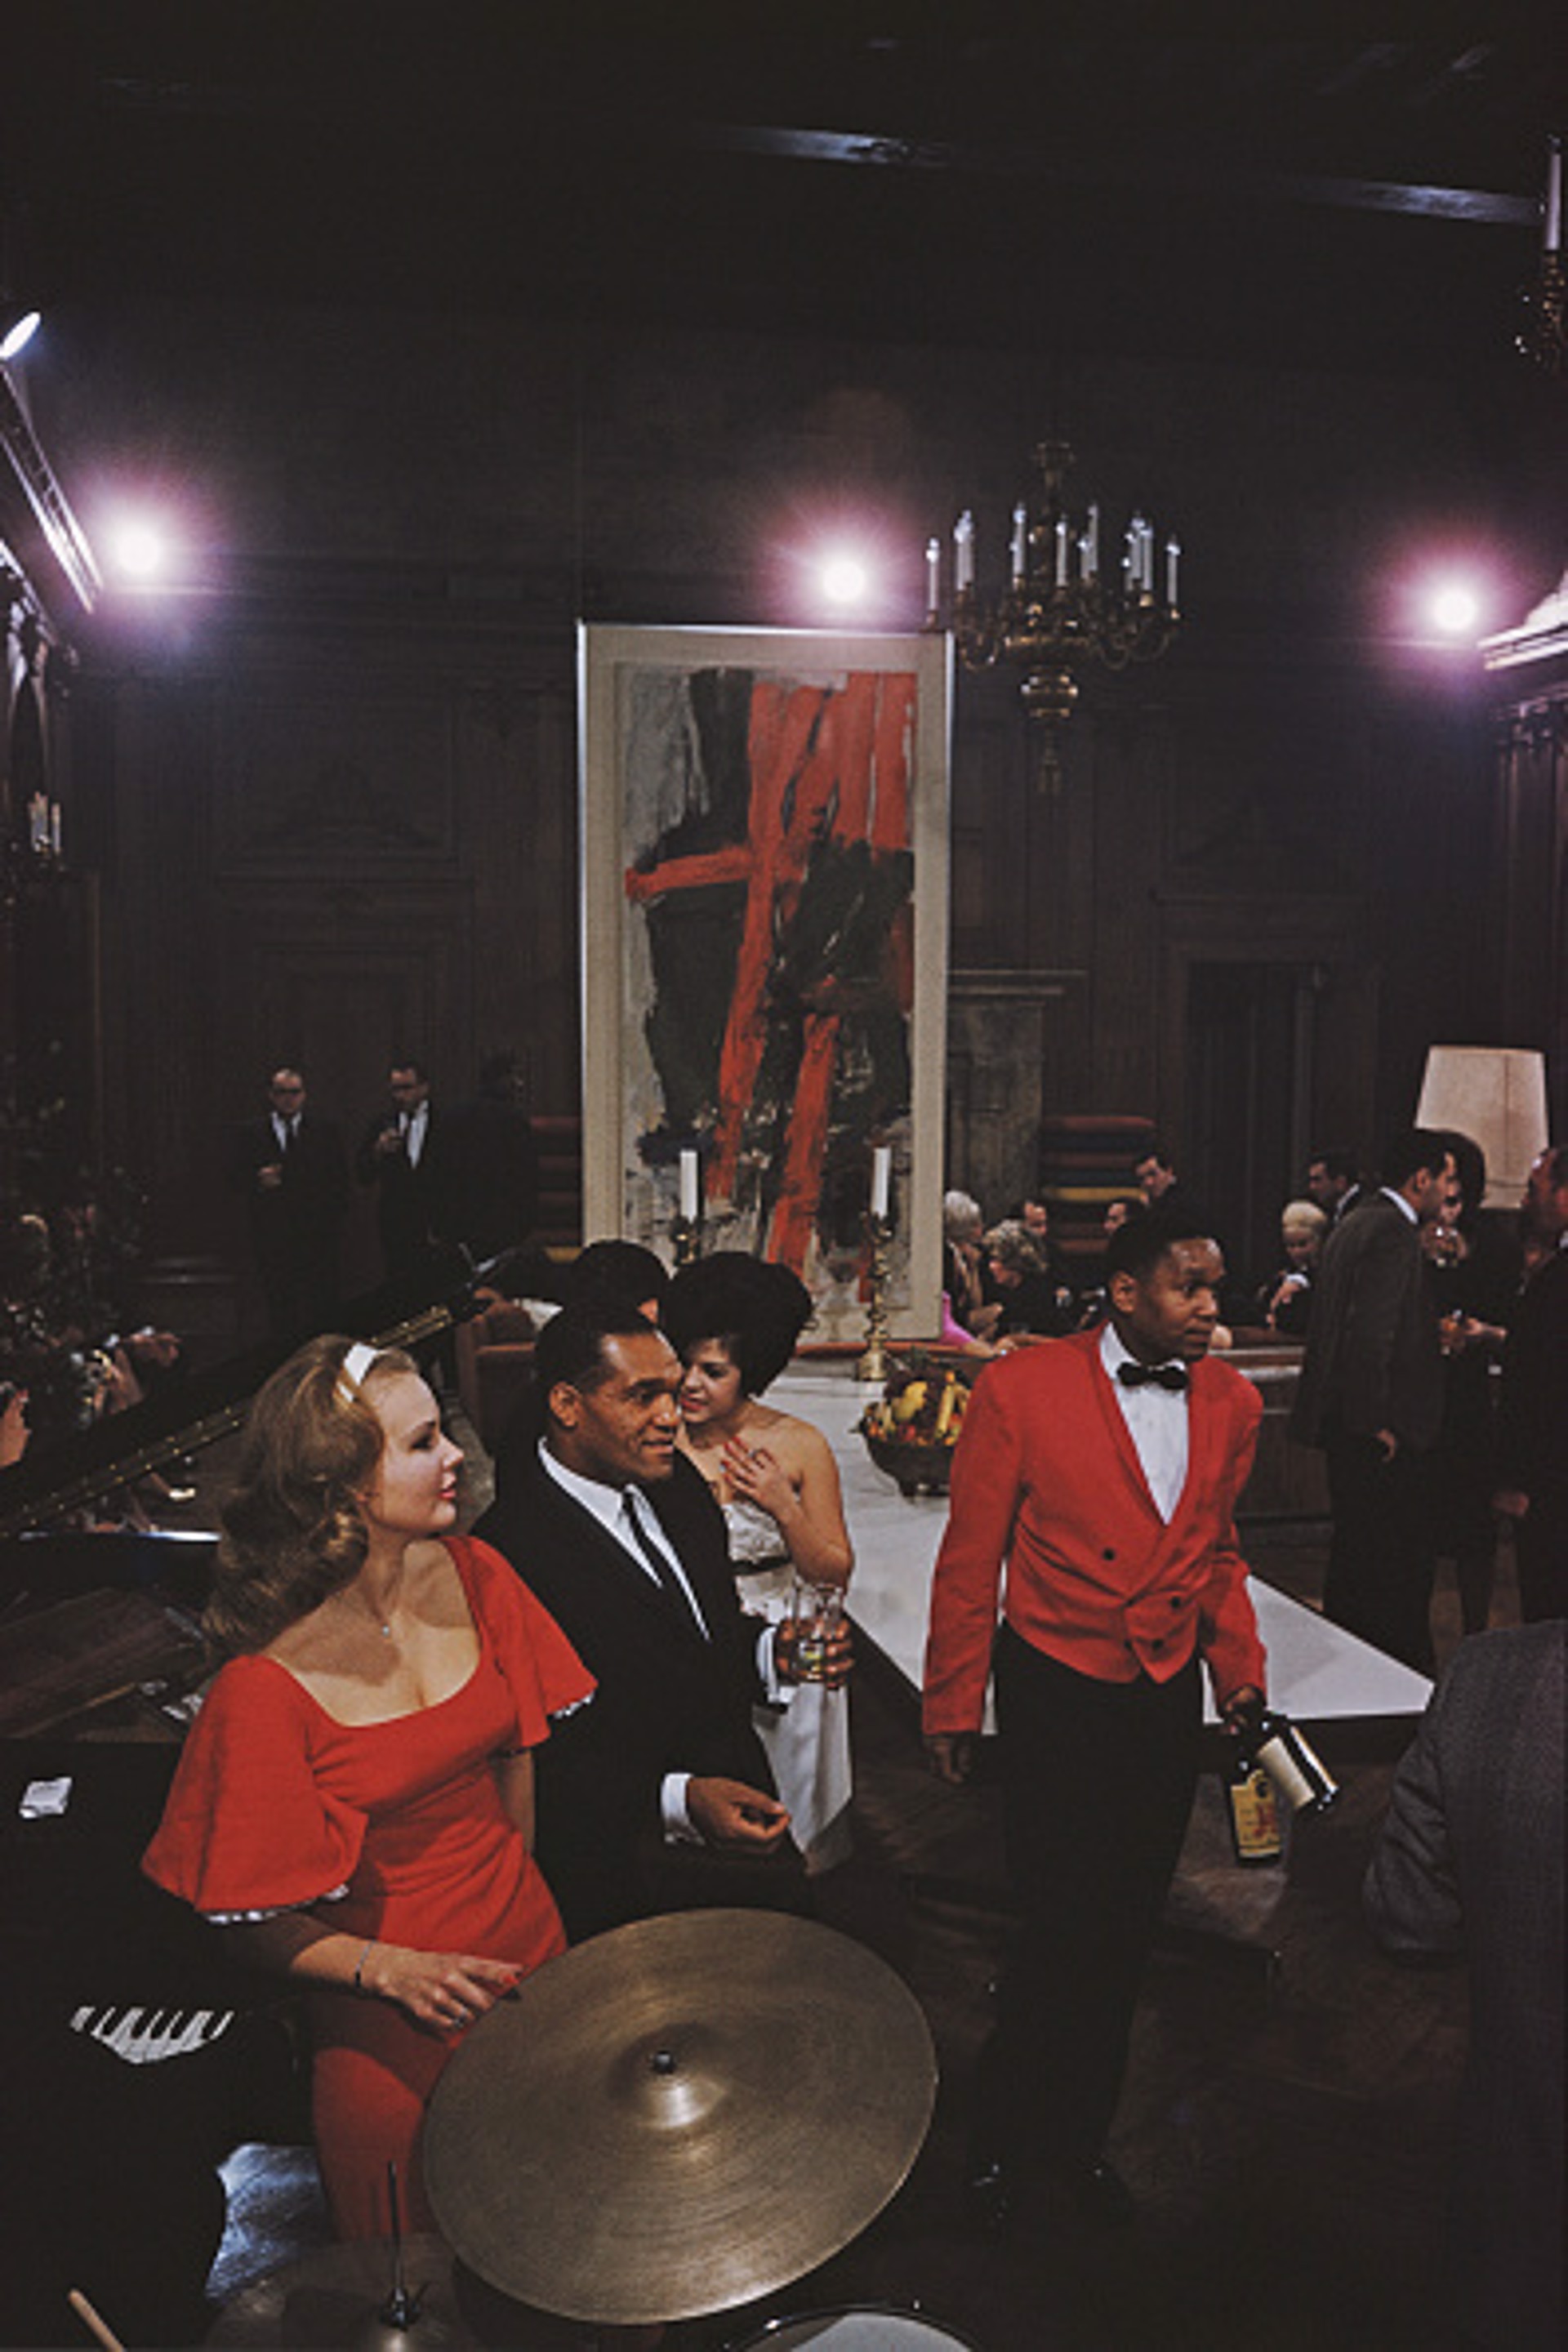 Party At The Playboy Mansion by Slim Aarons